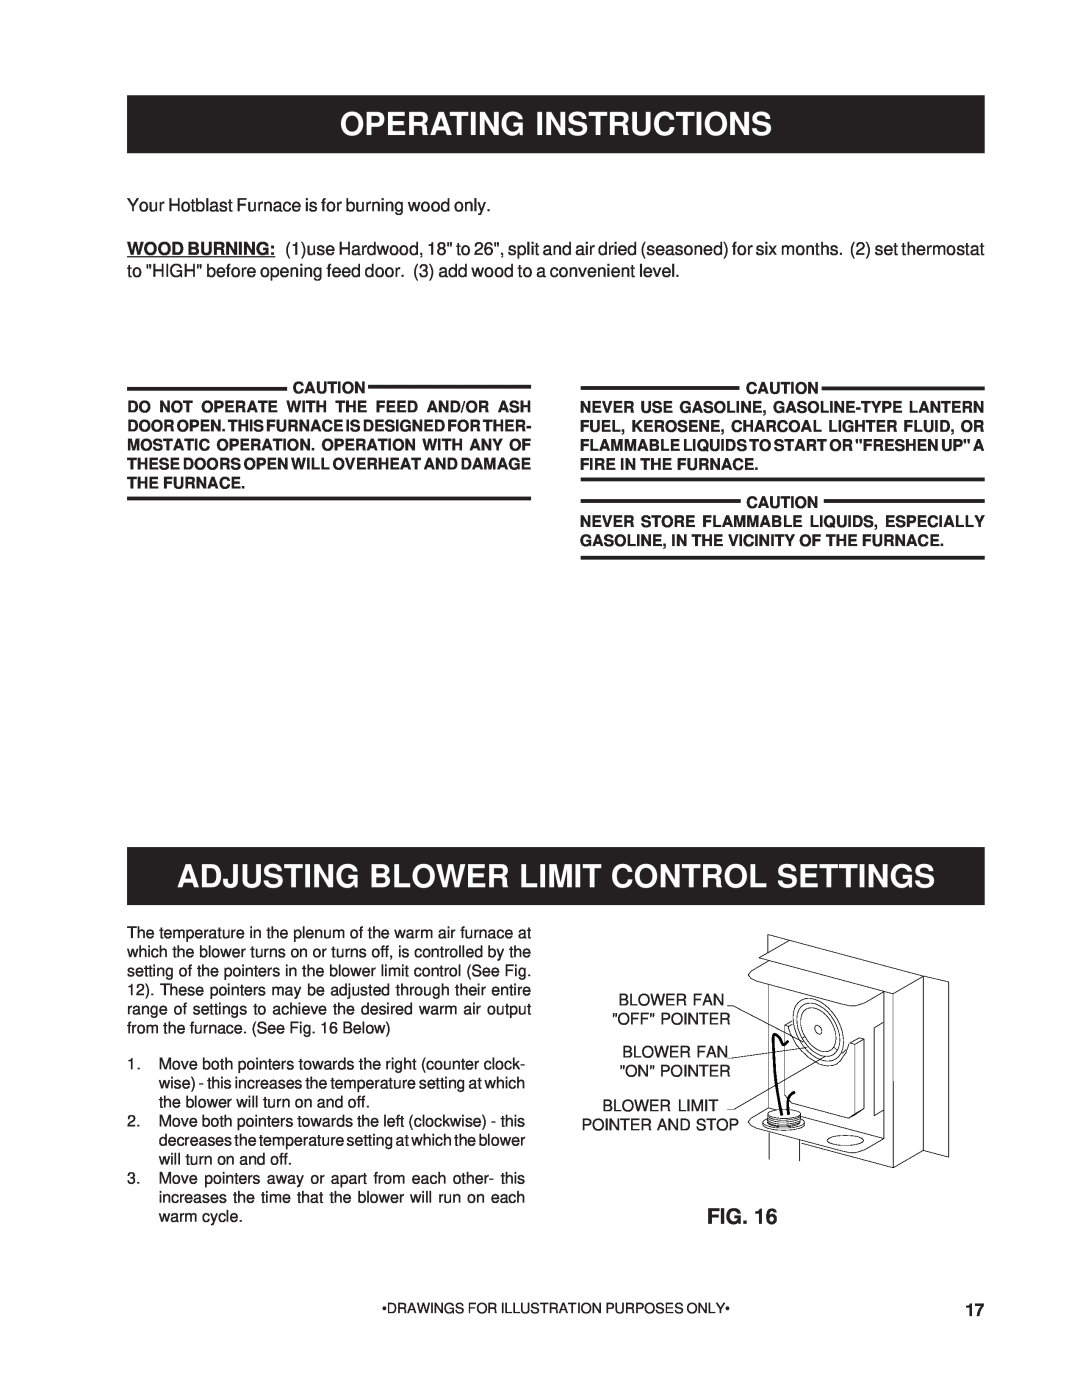 United States Stove 1200Q owner manual Operating Instructions, Adjusting Blower Limit Control Settings, Fig 